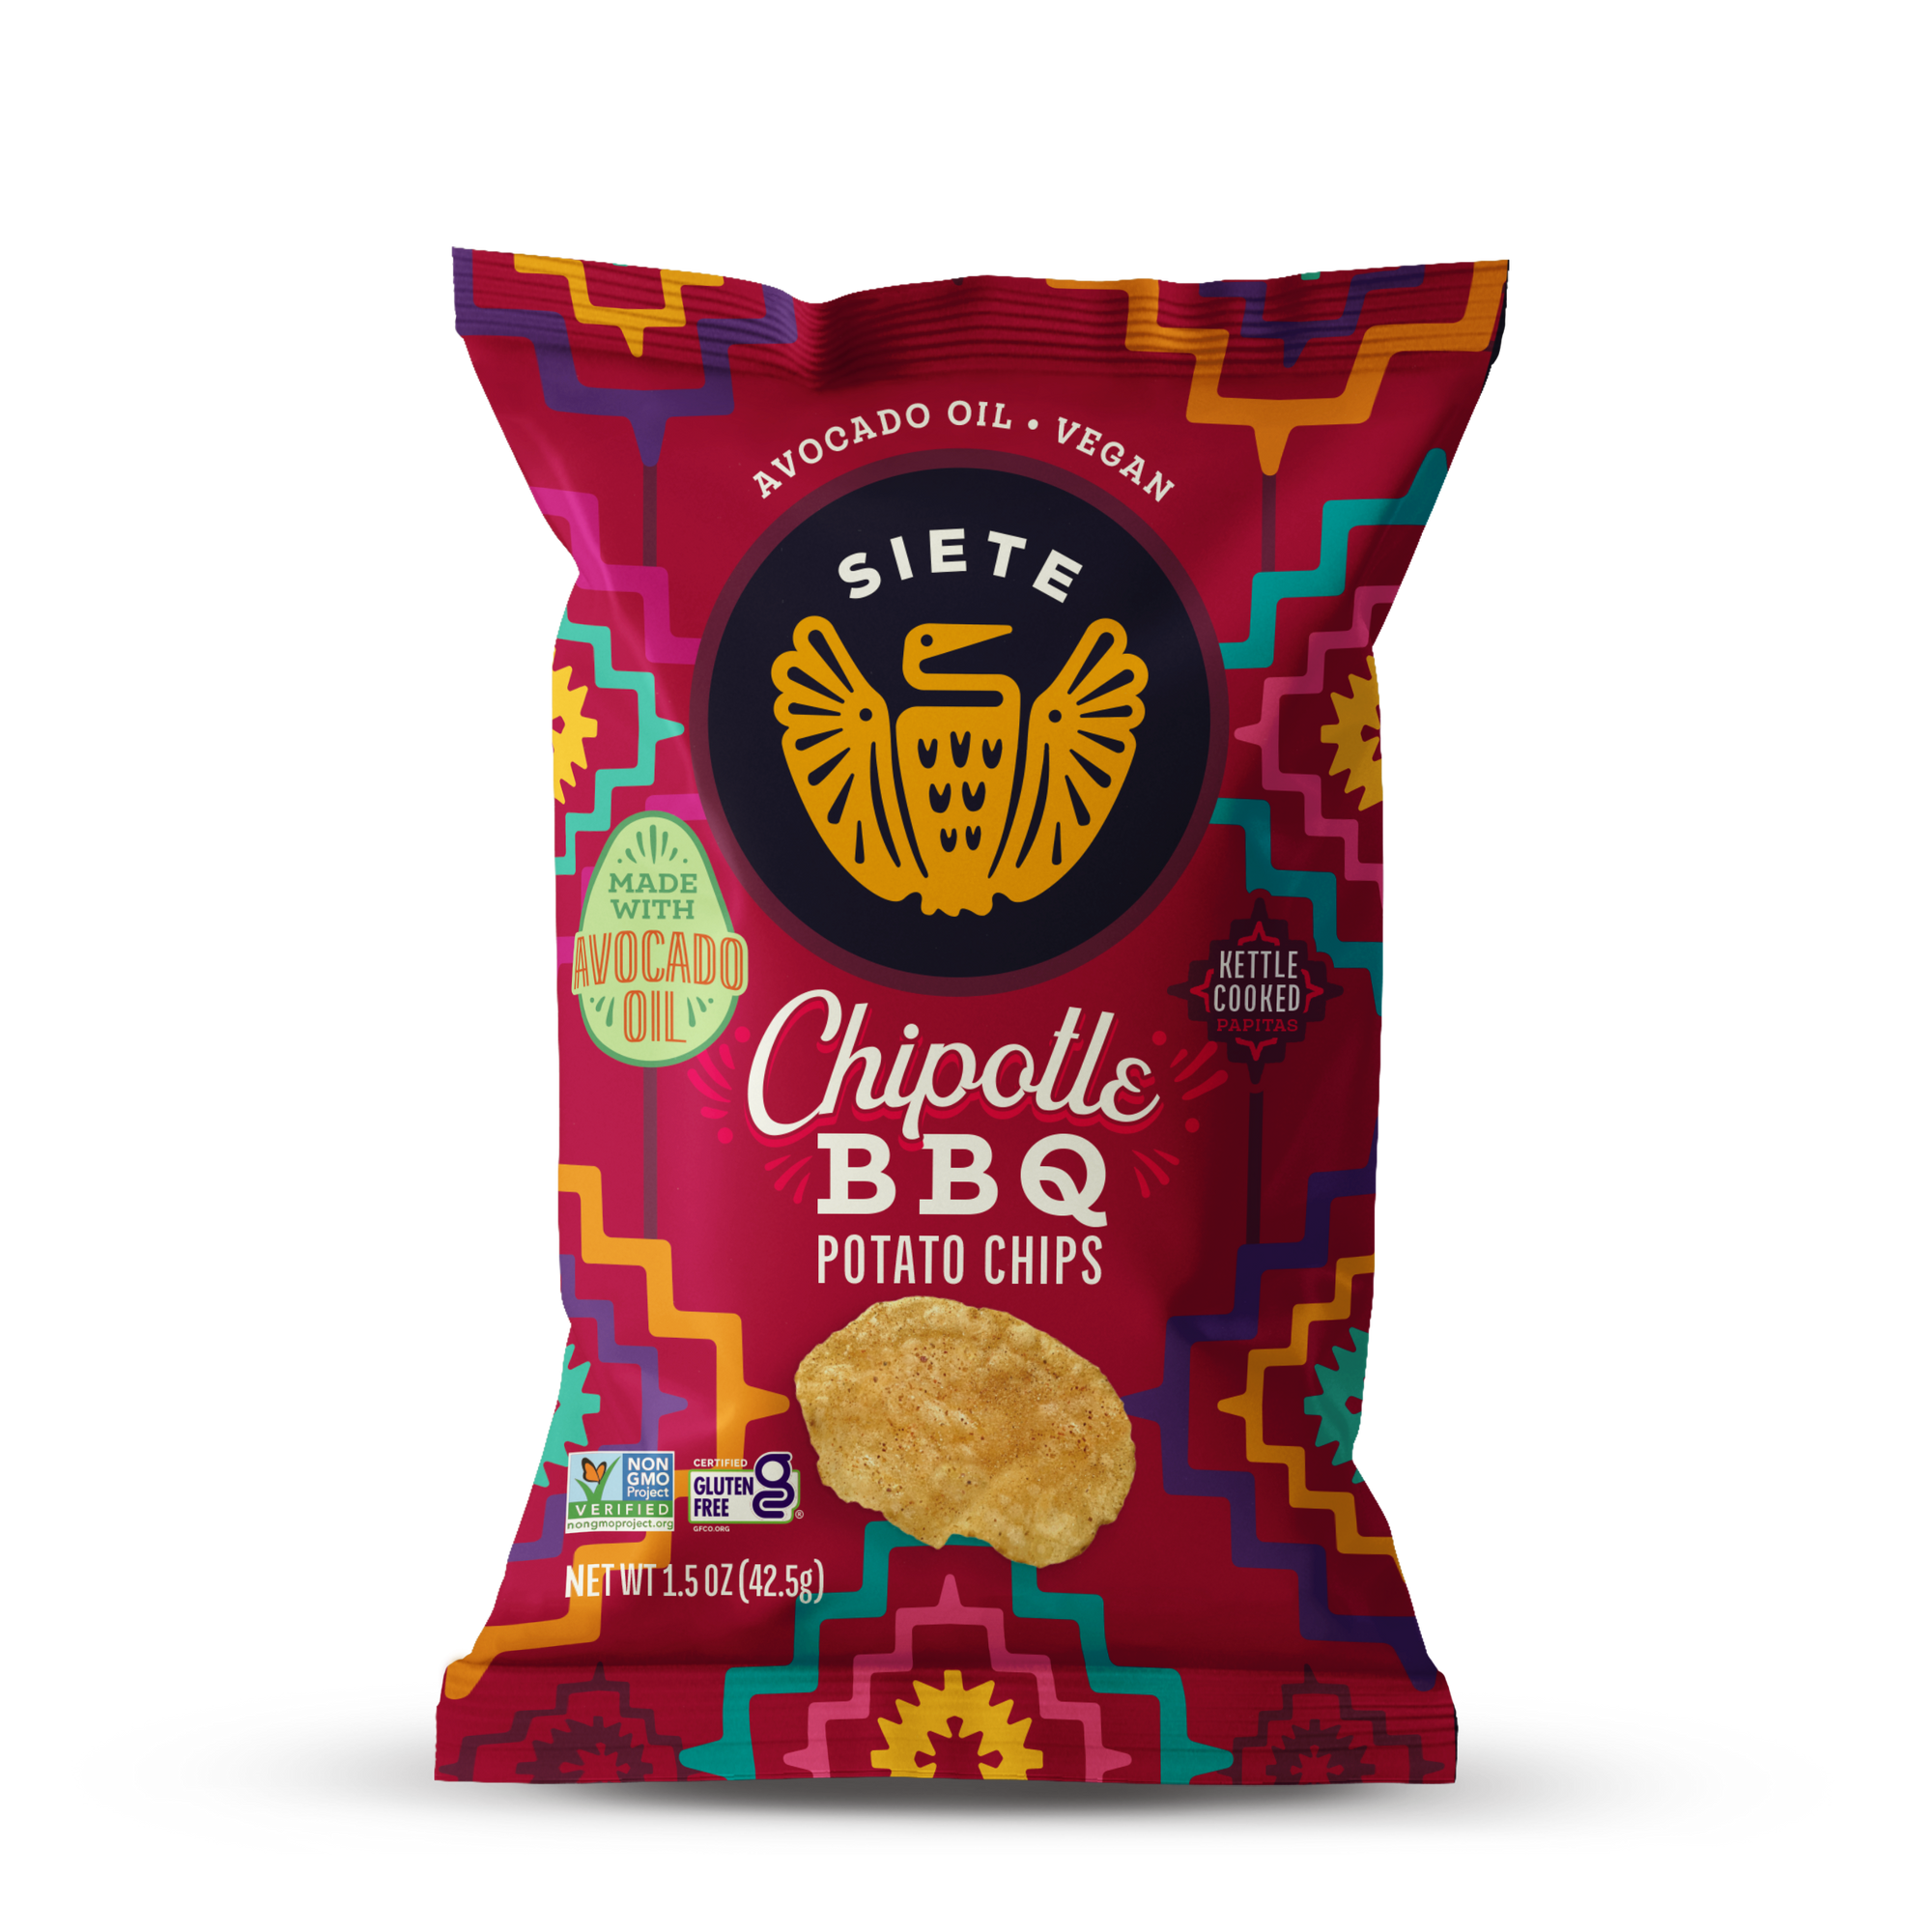 Chipotle BBQ Kettle Cooked Potato Chips 1.5 oz